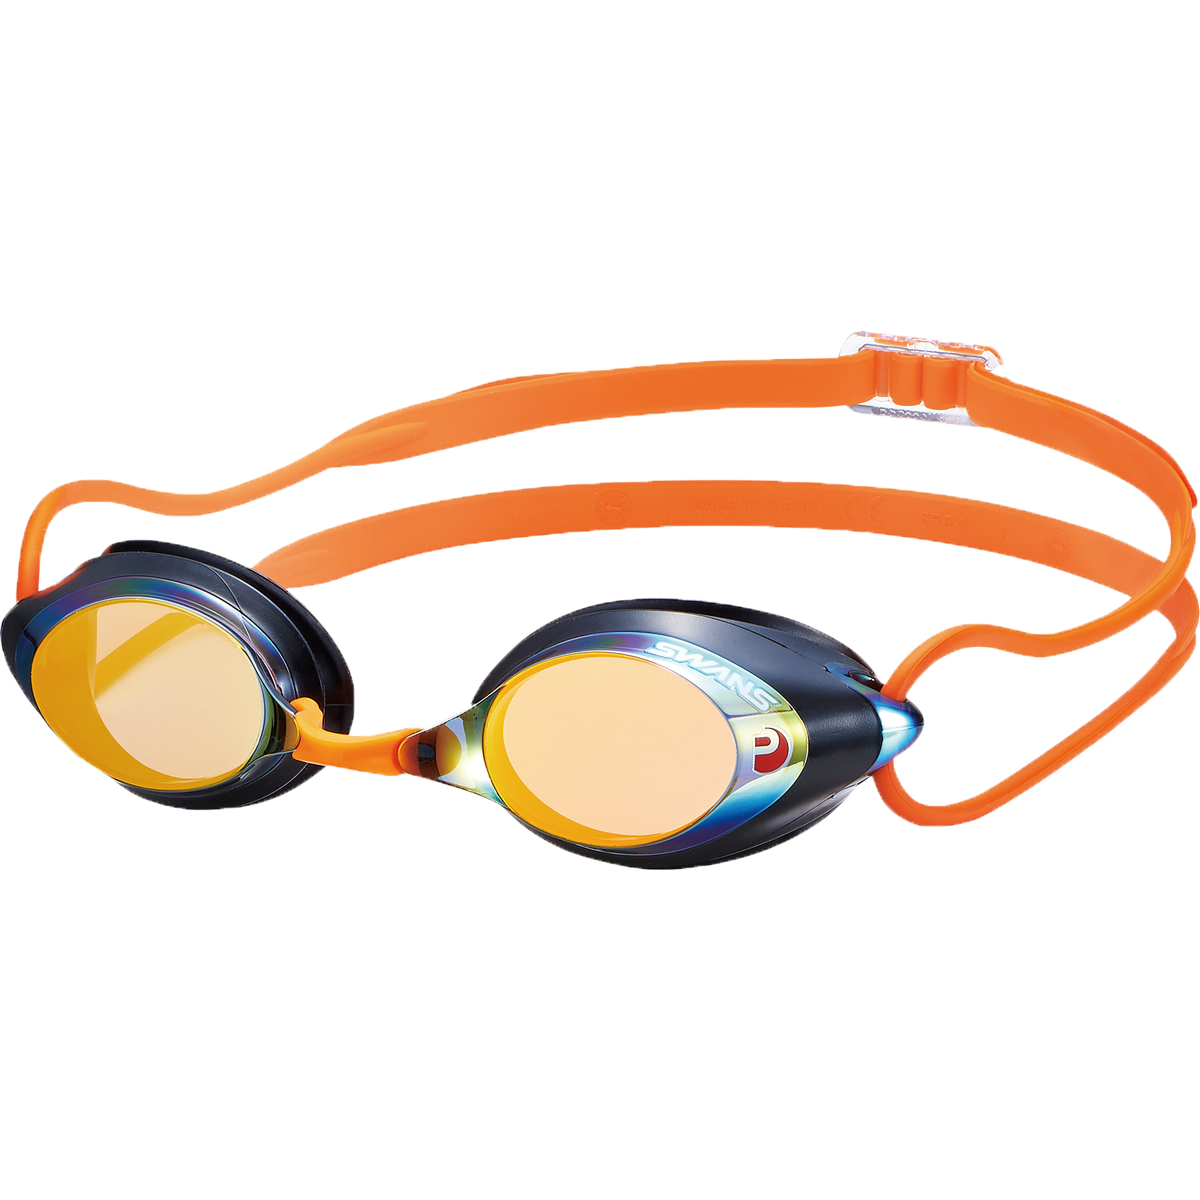 Swans SRX Mirrored Racing Goggles